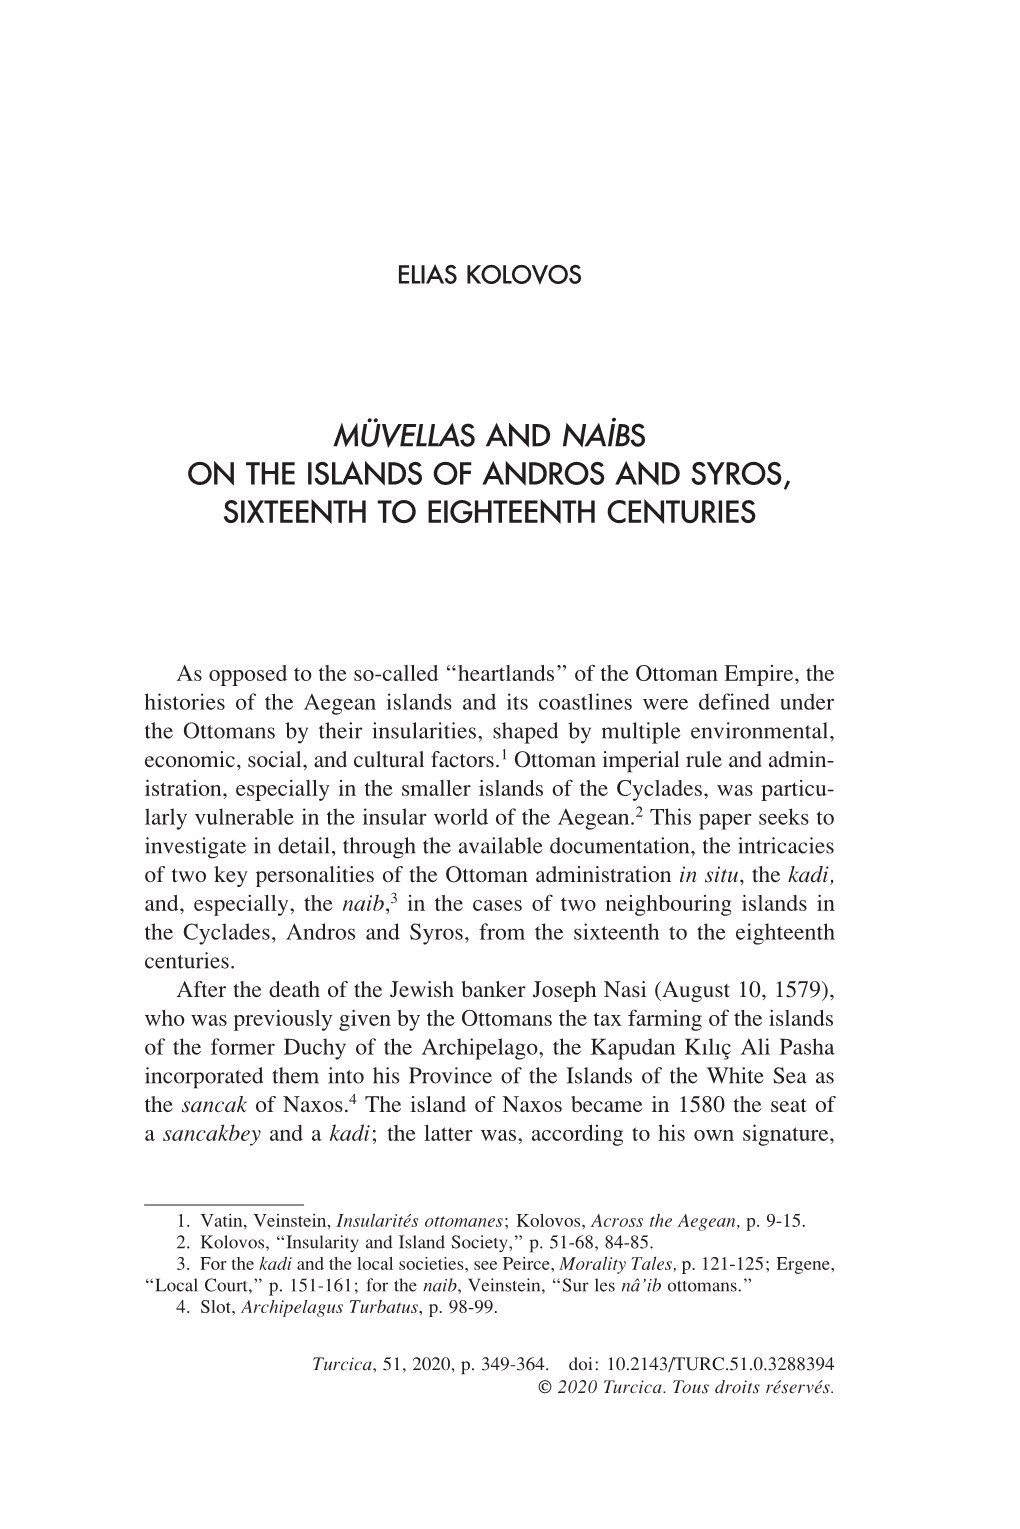 Müvellas and Naibs on the Islands of Andros and Syros, Sixteenth to Eighteenth Centuries